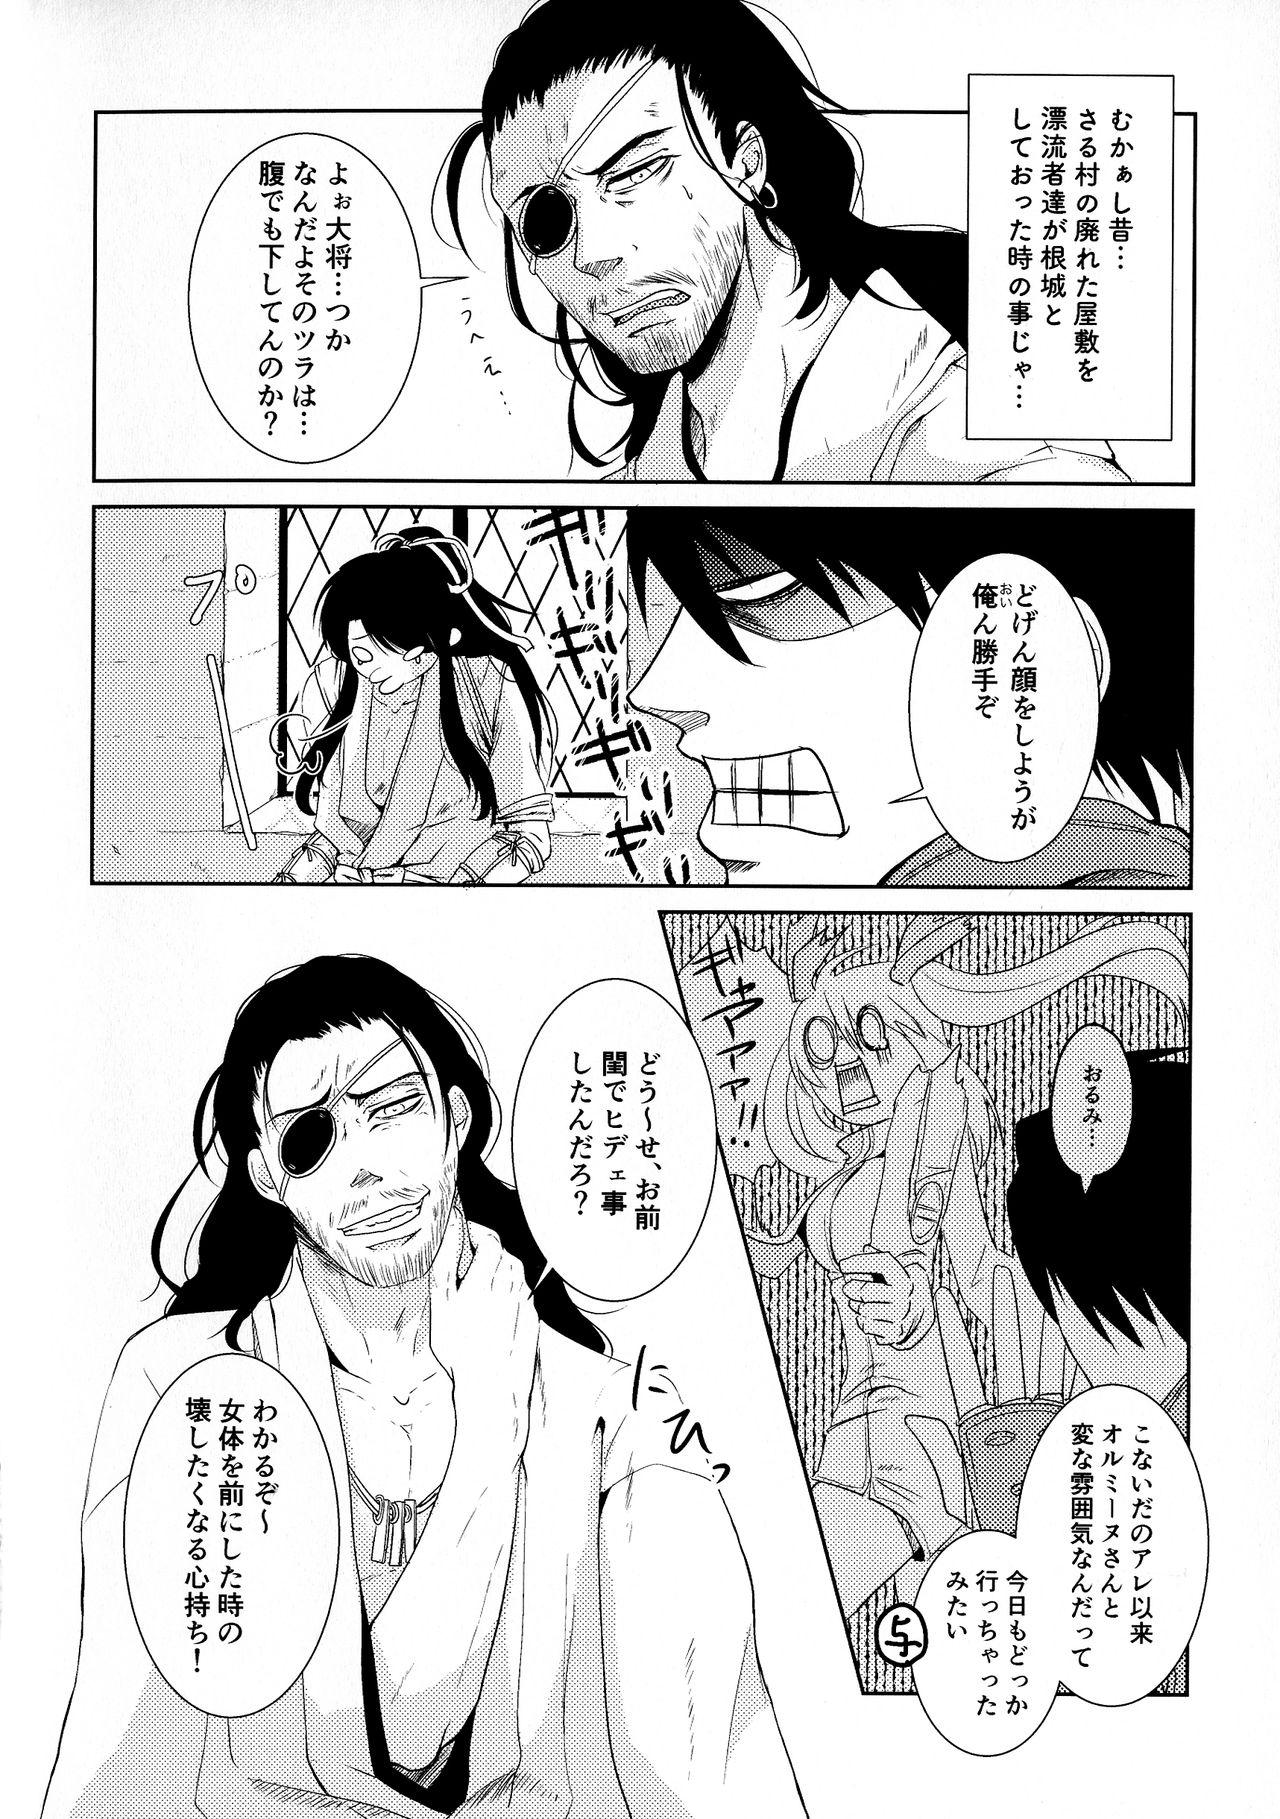 Soapy Bukiyou na Caprice - Drifters Whipping - Page 3